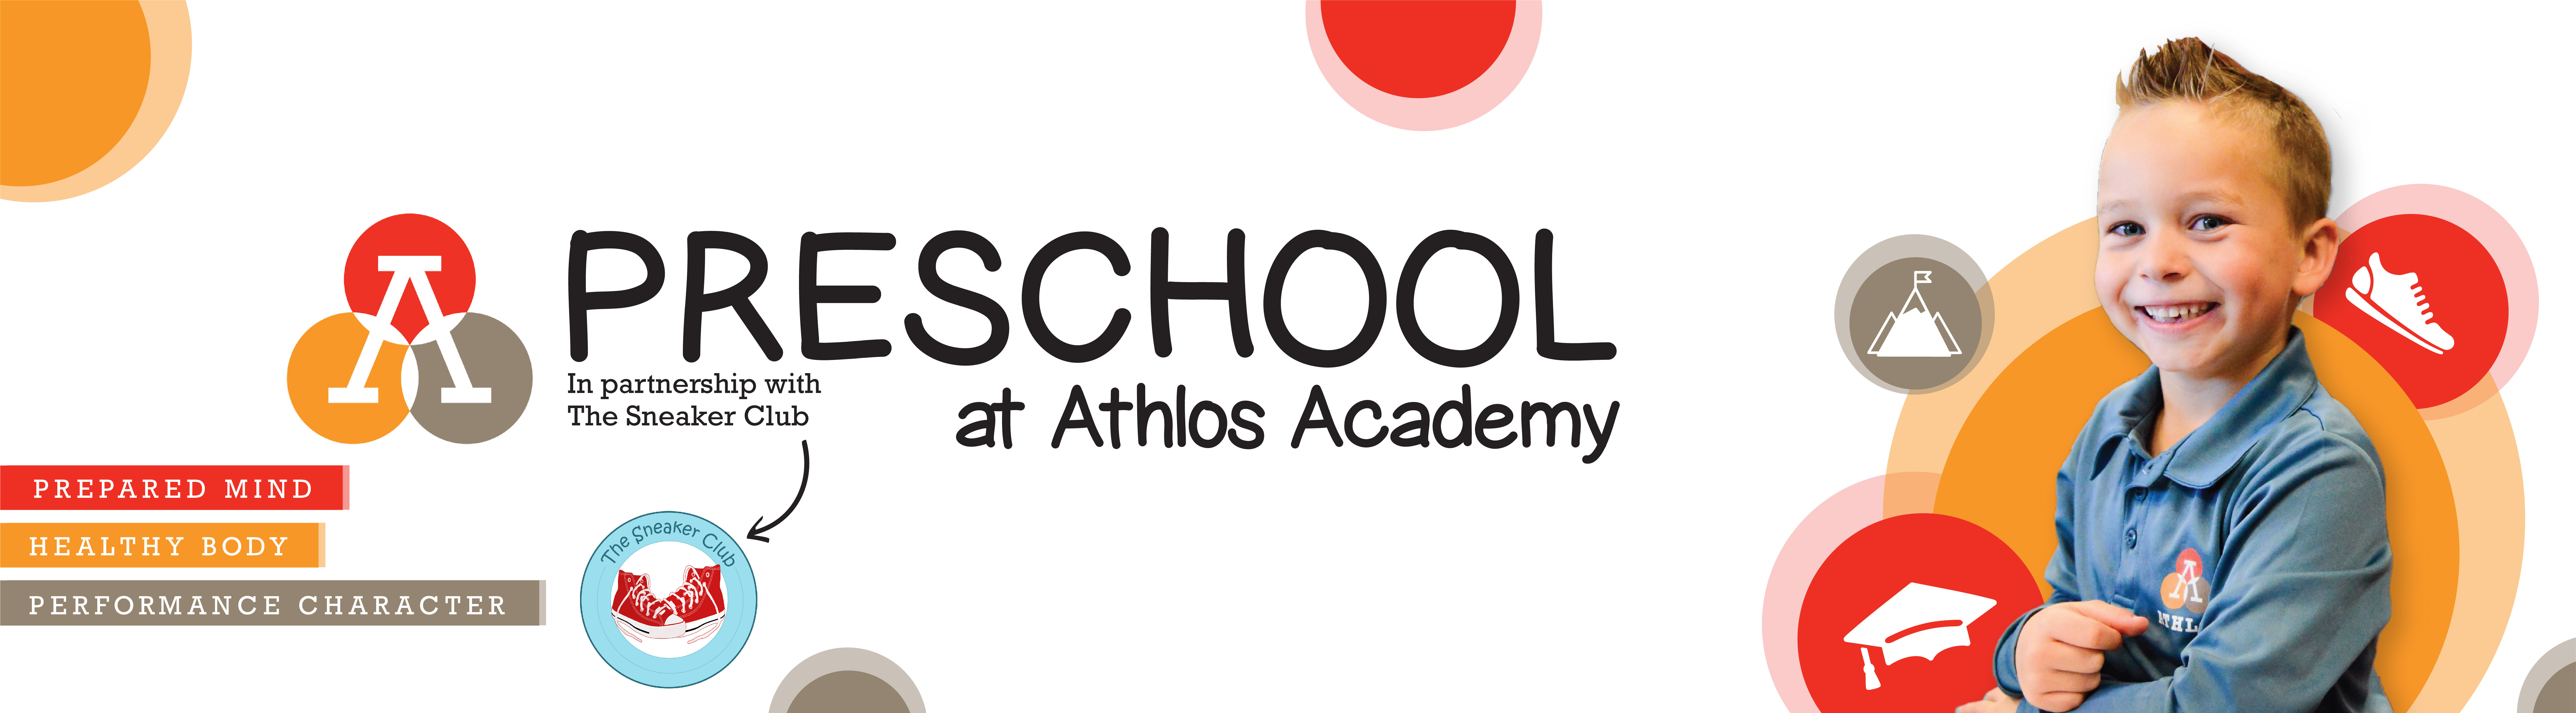 Preschool is offered at Athlos Academy of Utah in partnership with The Sneaker Club!  